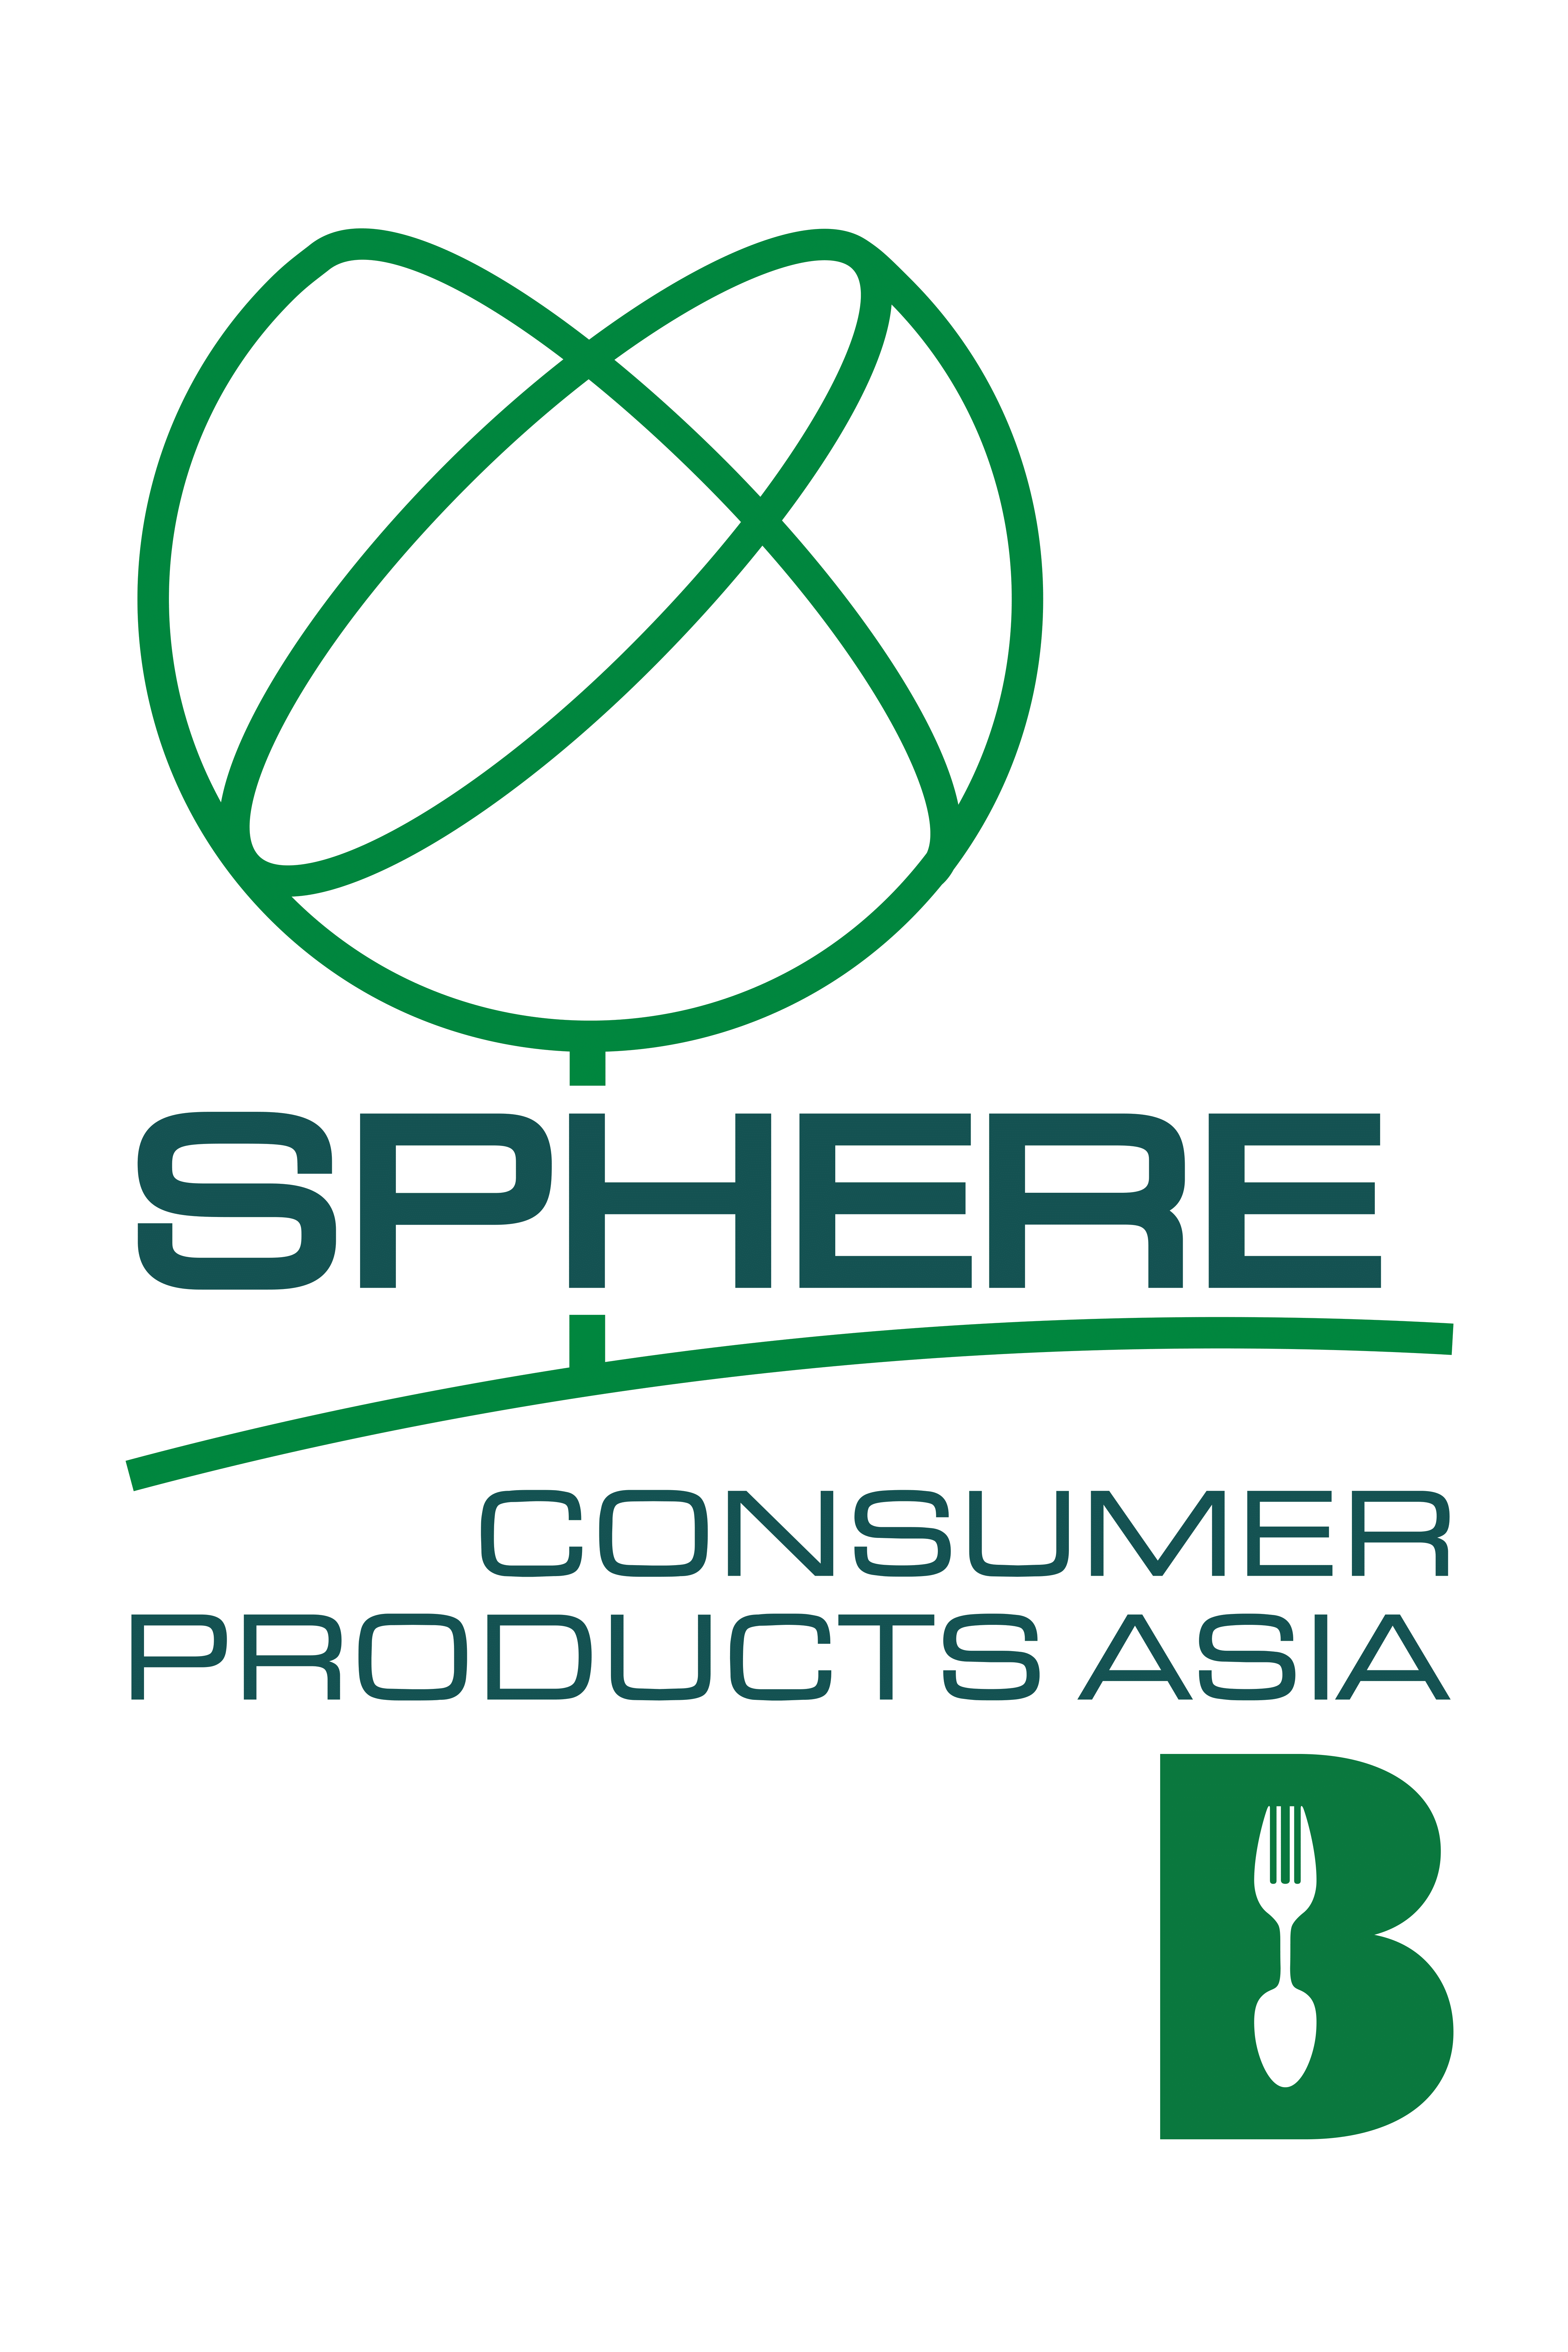 Sphere Consumer Products Asia (Bfooding)